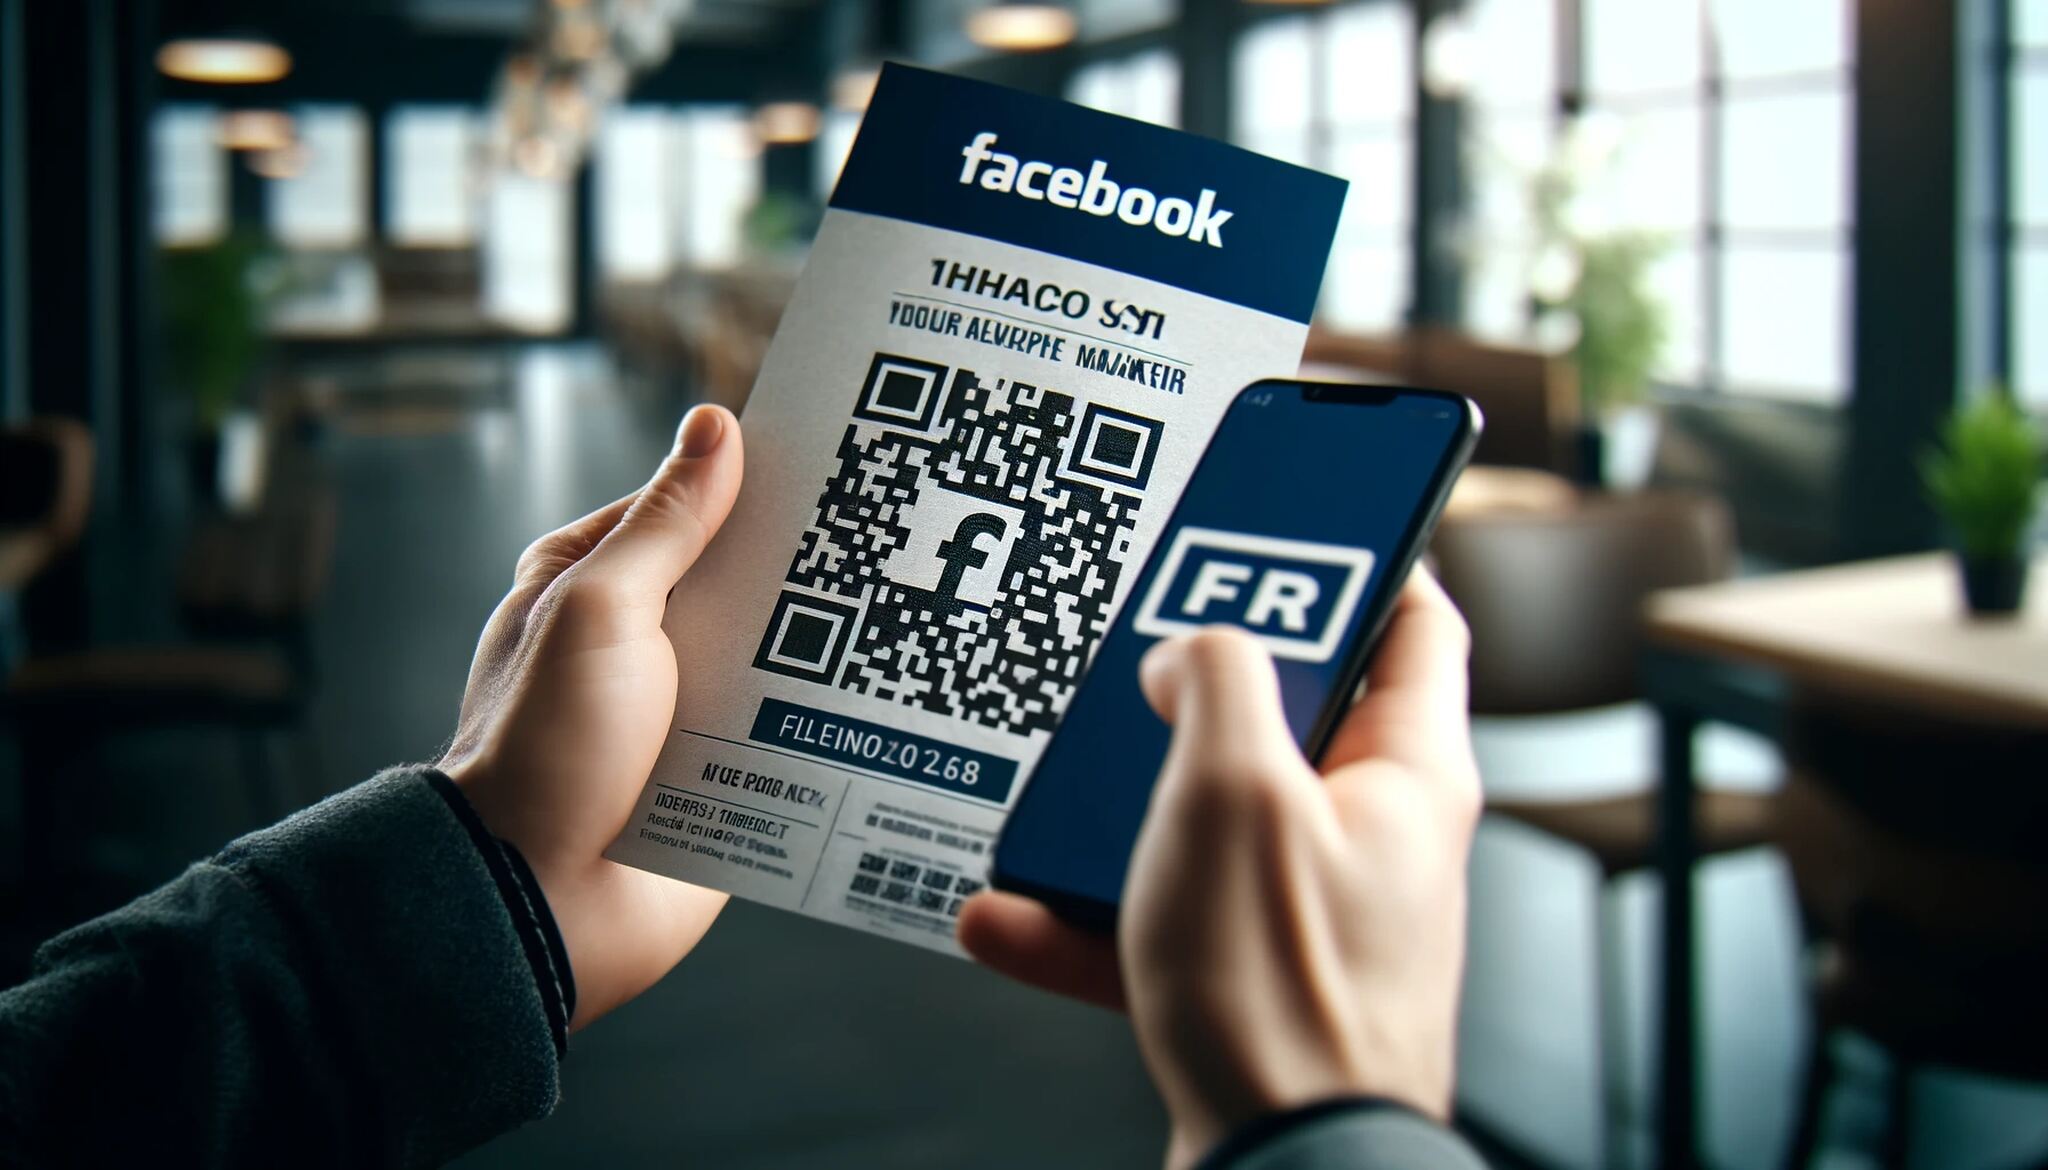 A close-up scene of a person's hand holding a smartphone, scanning a Facebook QR code on a printed flyer